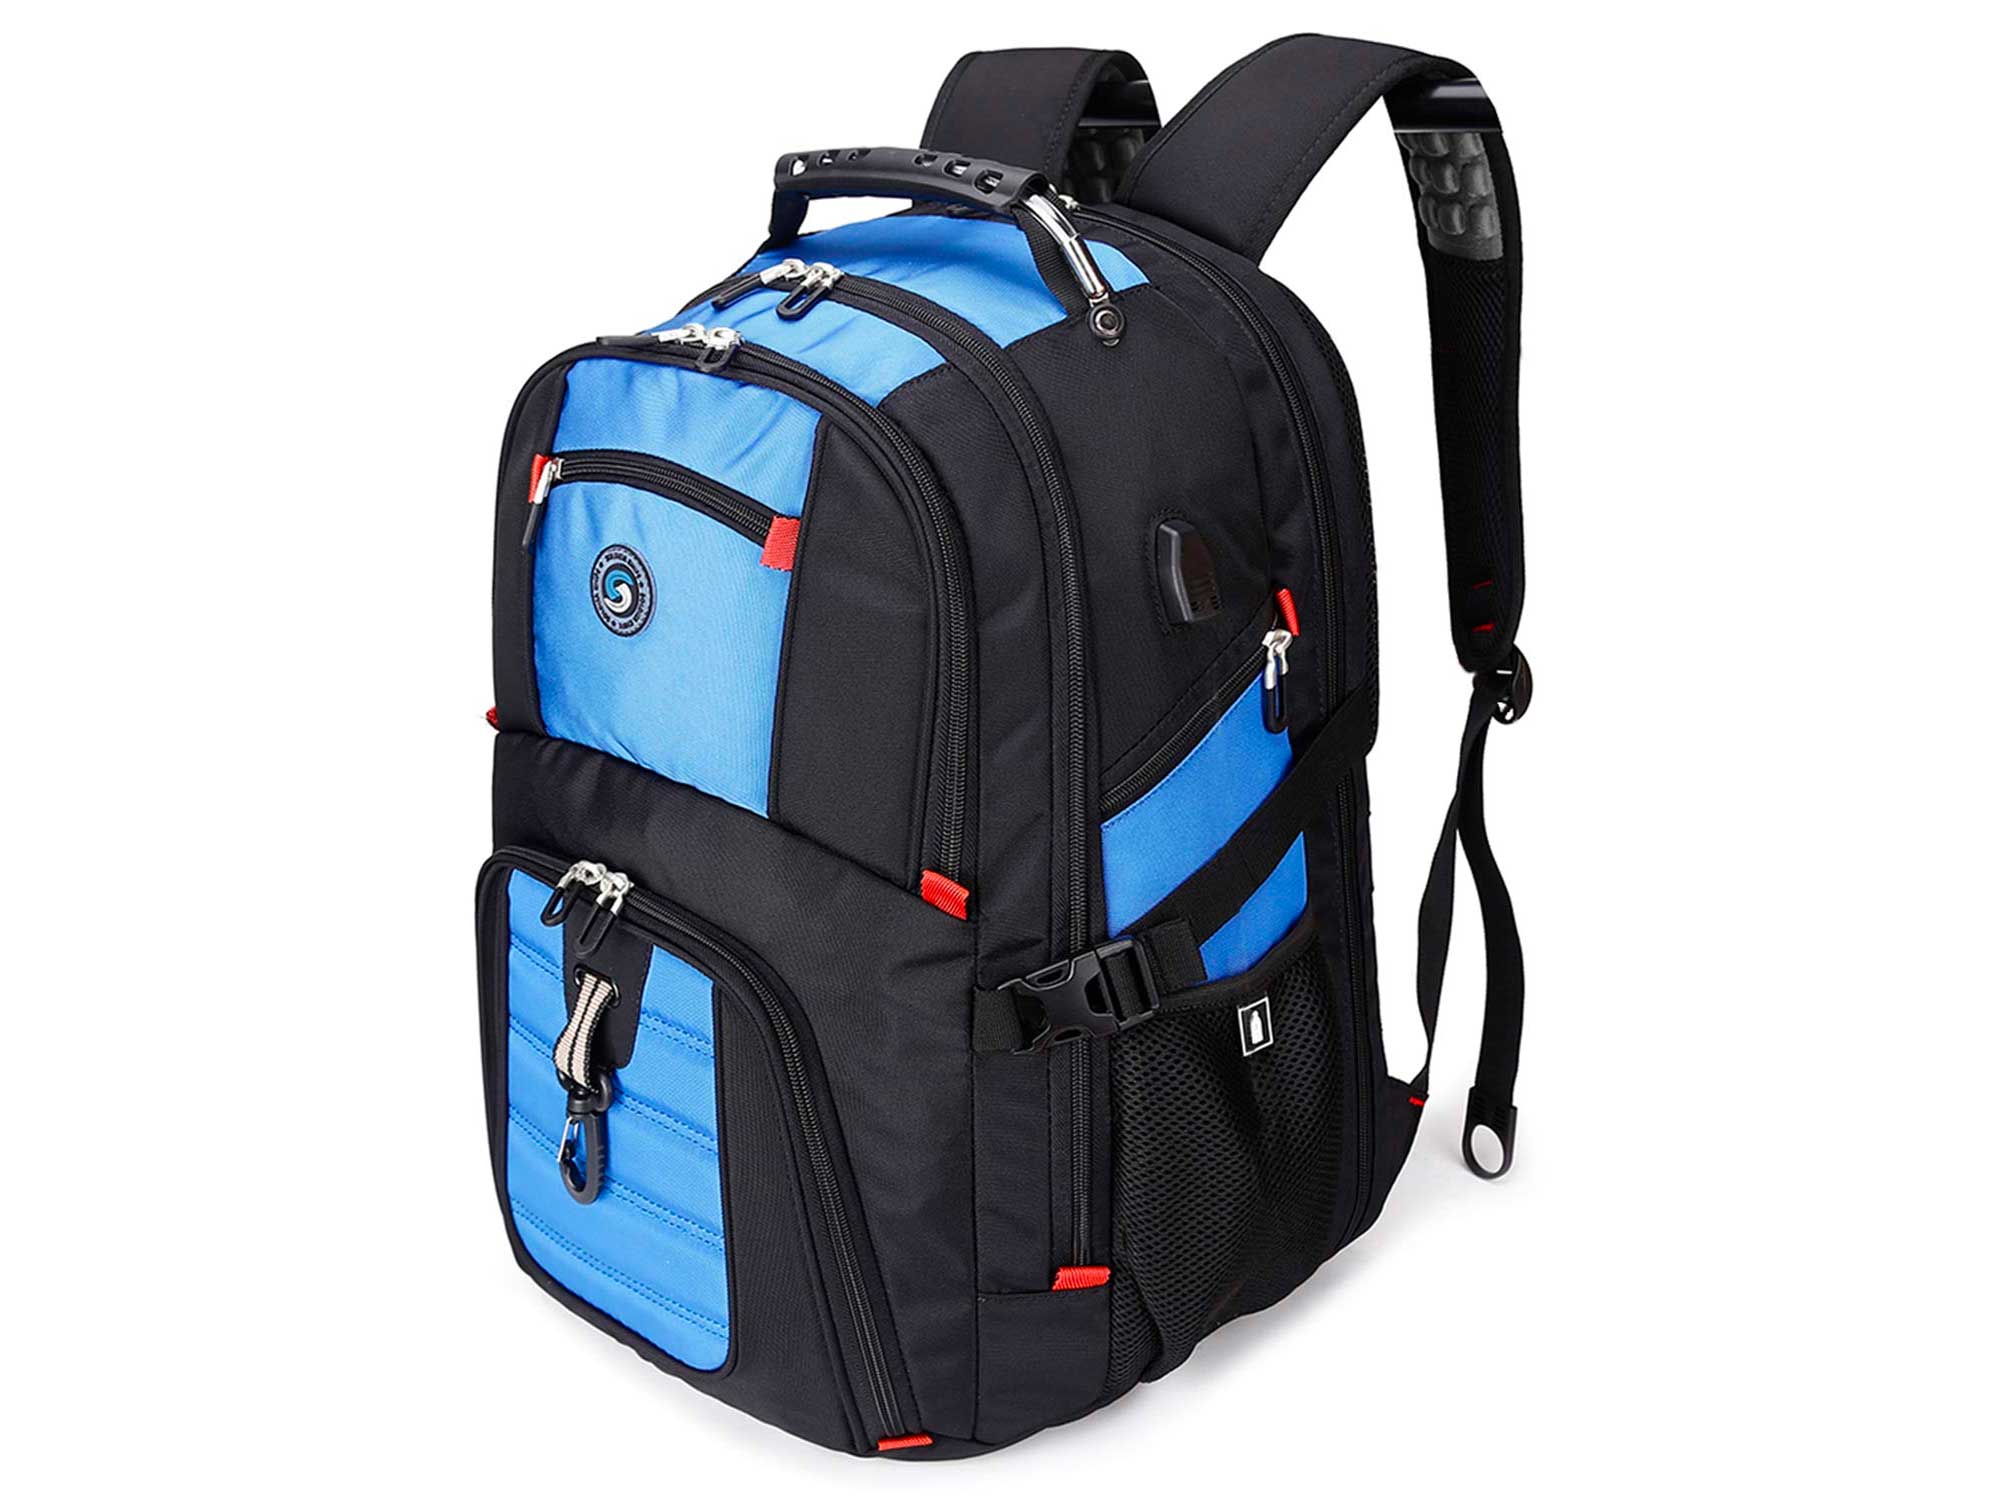 Durable 50L Travel Laptop Backpack with USB Charging Port fit 17 Inch Laptops Blue